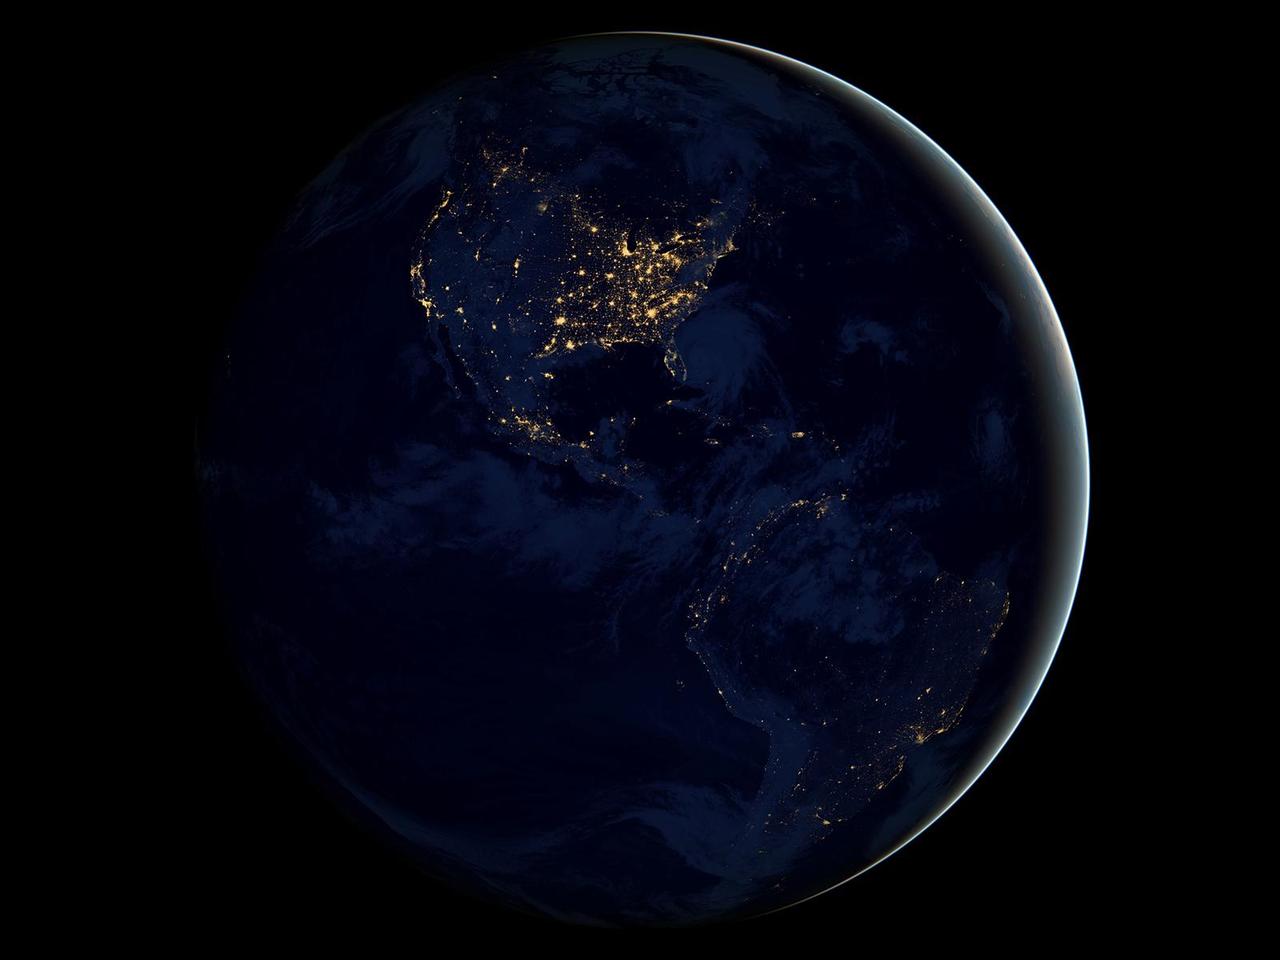 Image description: This new global view of Earth&#8217;s city lights is a composite assembled from data acquired by the Suomi National Polar-orbiting Partnership (NPP) satellite. The data was acquired over nine days in April 2012 and 13 days in October 2012. It took 312 orbits to get a clear shot of every parcel of Earth&#8217;s land surface and islands. This new data was then mapped over existing Blue Marble imagery of Earth to provide a realistic view of the planet.
View a larger image.
Image from NASA&#8217;s Earth Observatory/NOAA/DOD